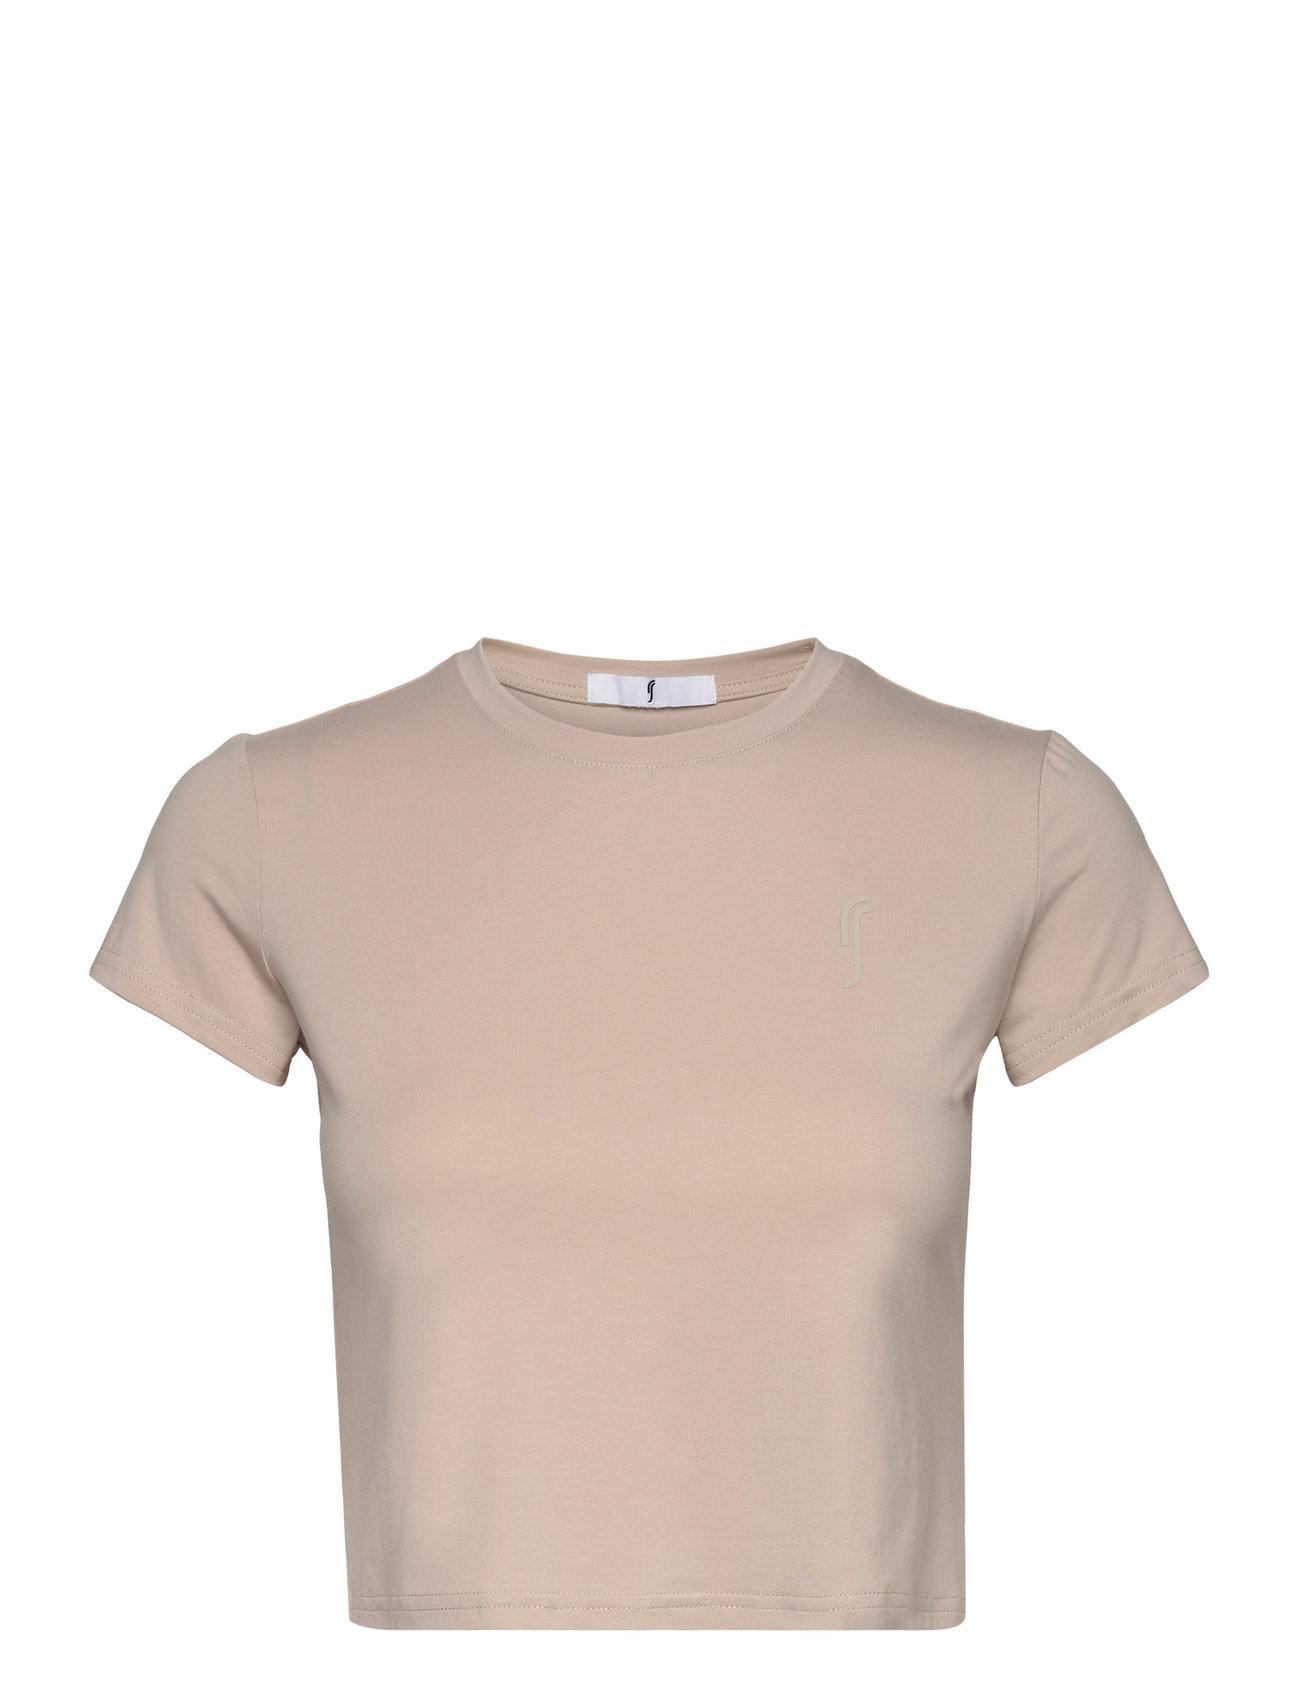 Kelly Top Sport T-shirts & Tops Short-sleeved Beige RS Sports